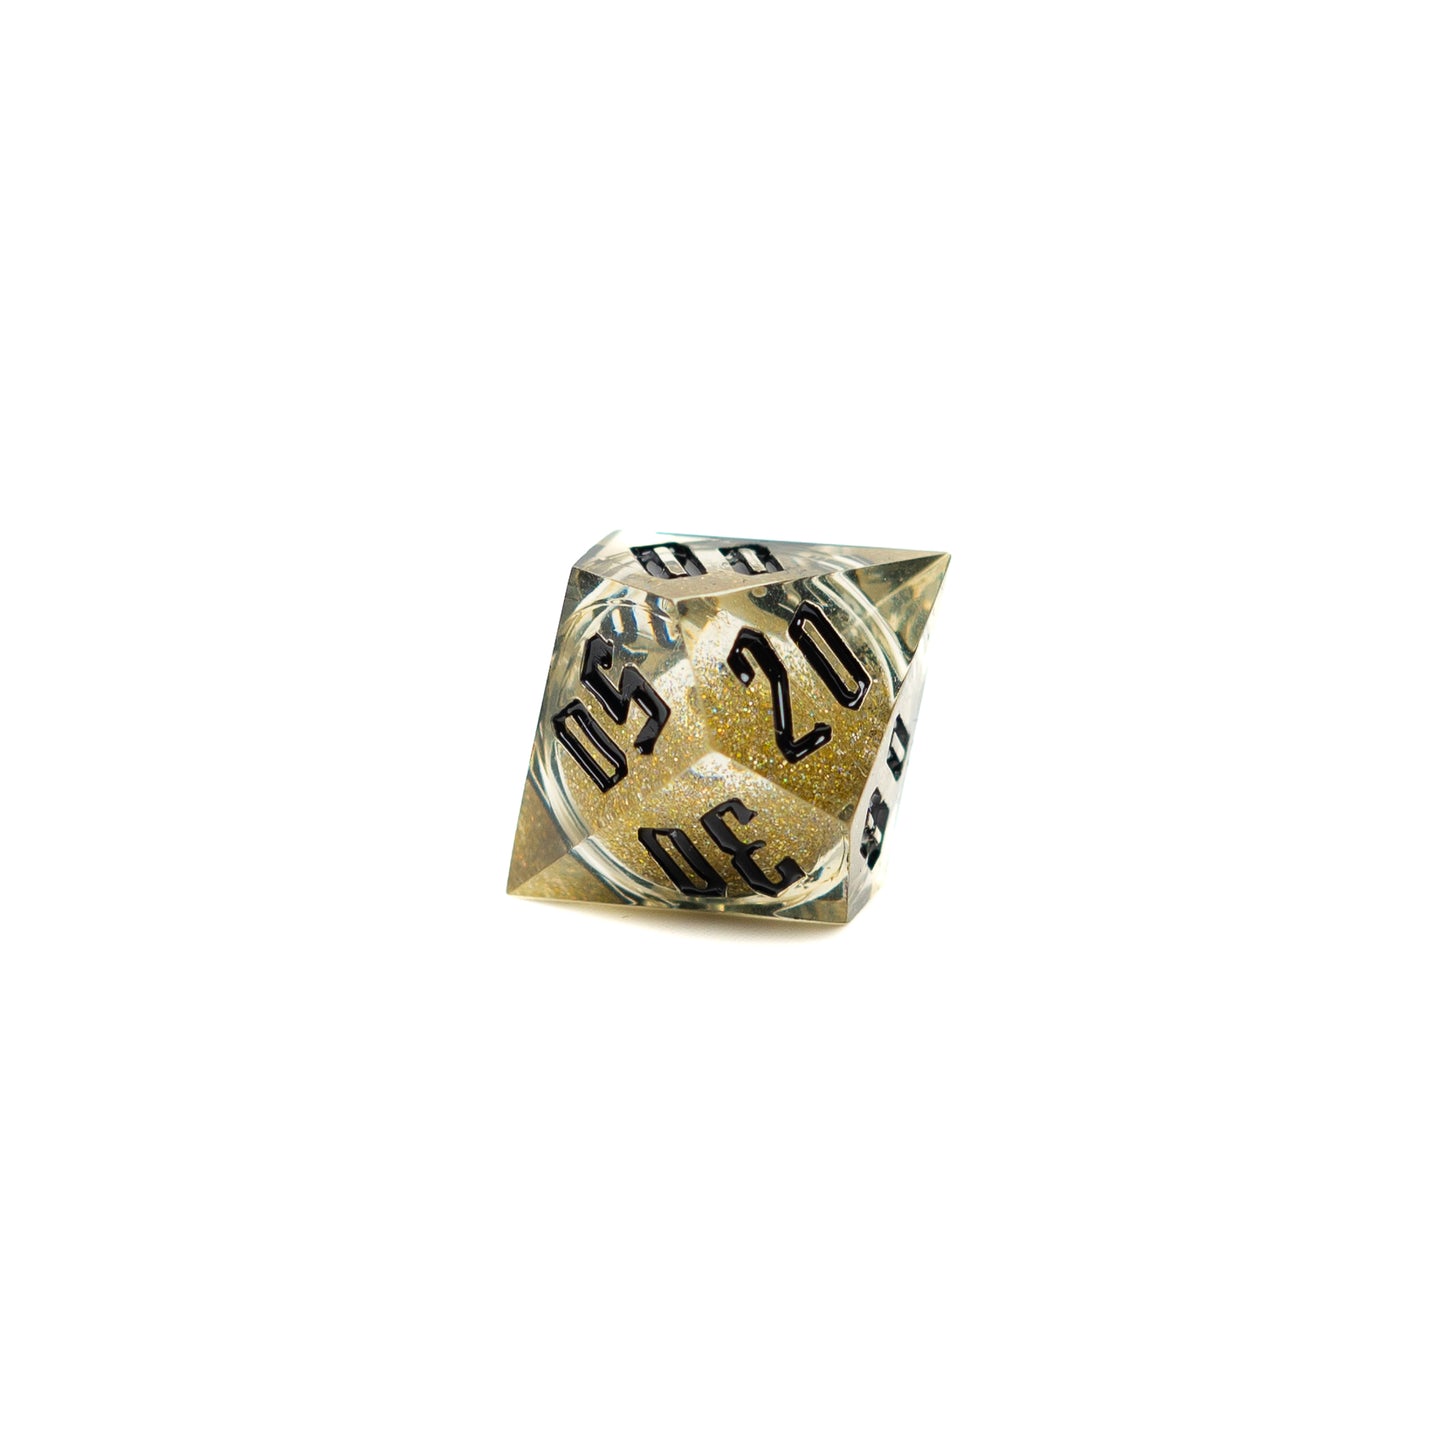 Roll Britannia Sharp Edge Resin Liquid Core Dungeons and Dragons D10 Percentile Dice with Gold Glitter Aesthetic